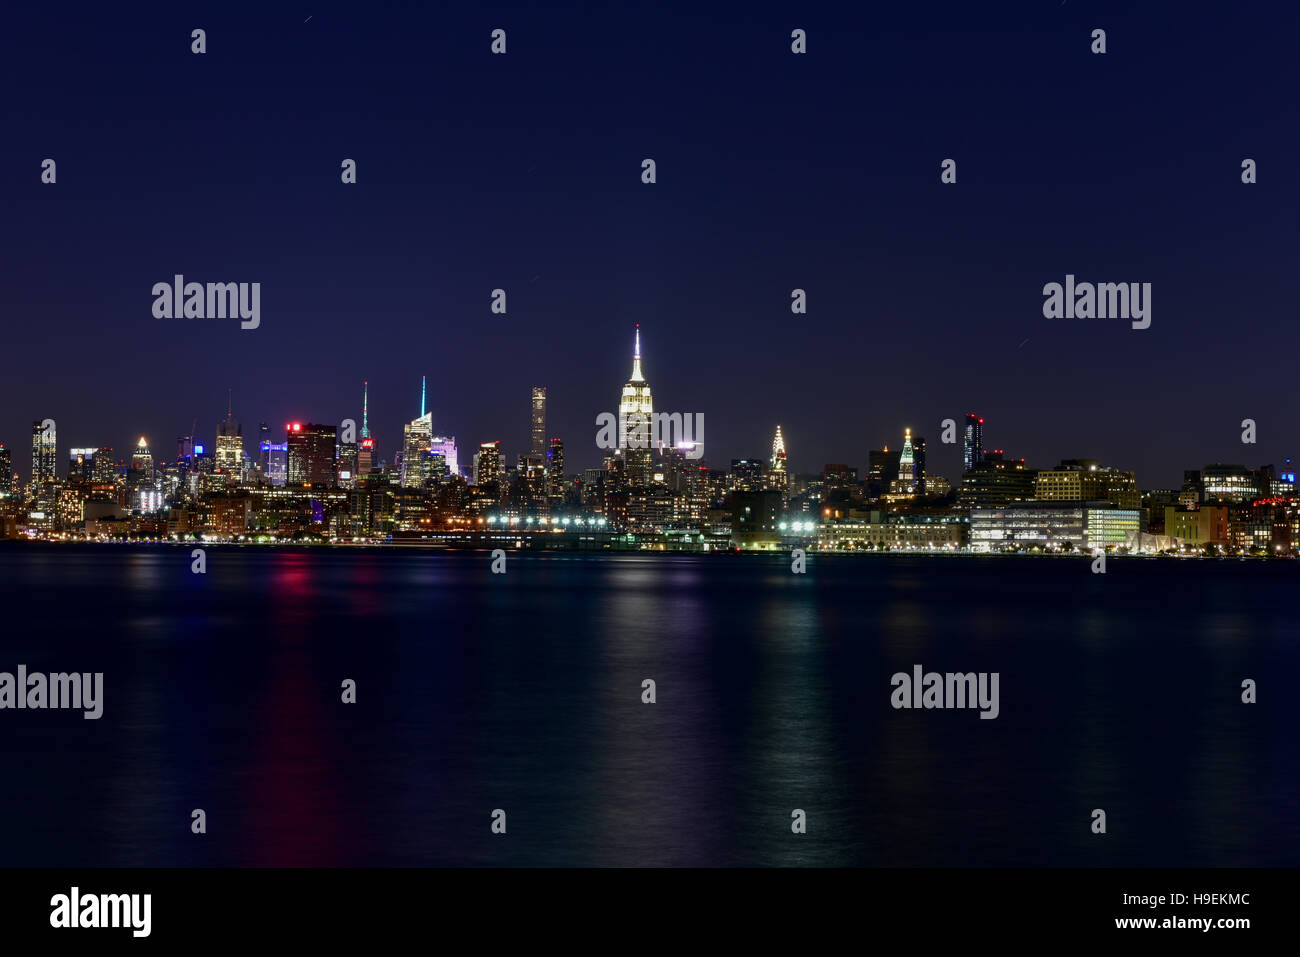 New York skyline as viewed across the Hudson River in New Jersey at dusk. Stock Photo